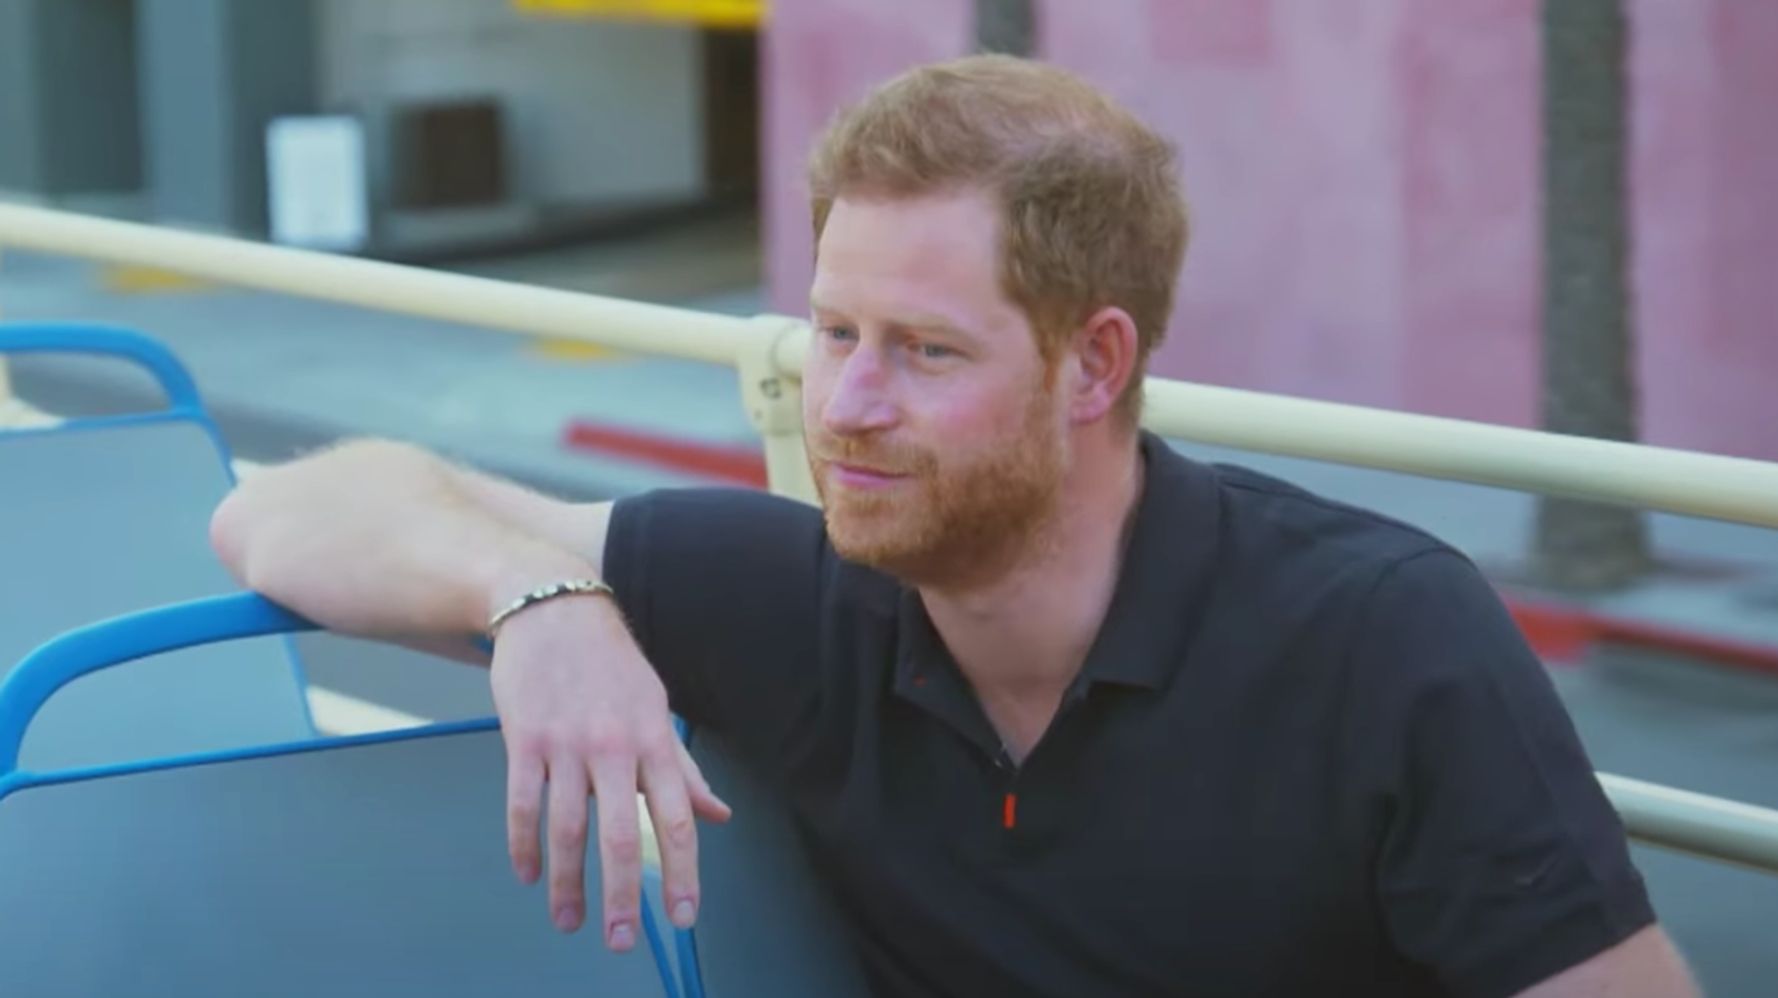 Prince Harry opens a step back about the royal family: “It was destroying my mental health”